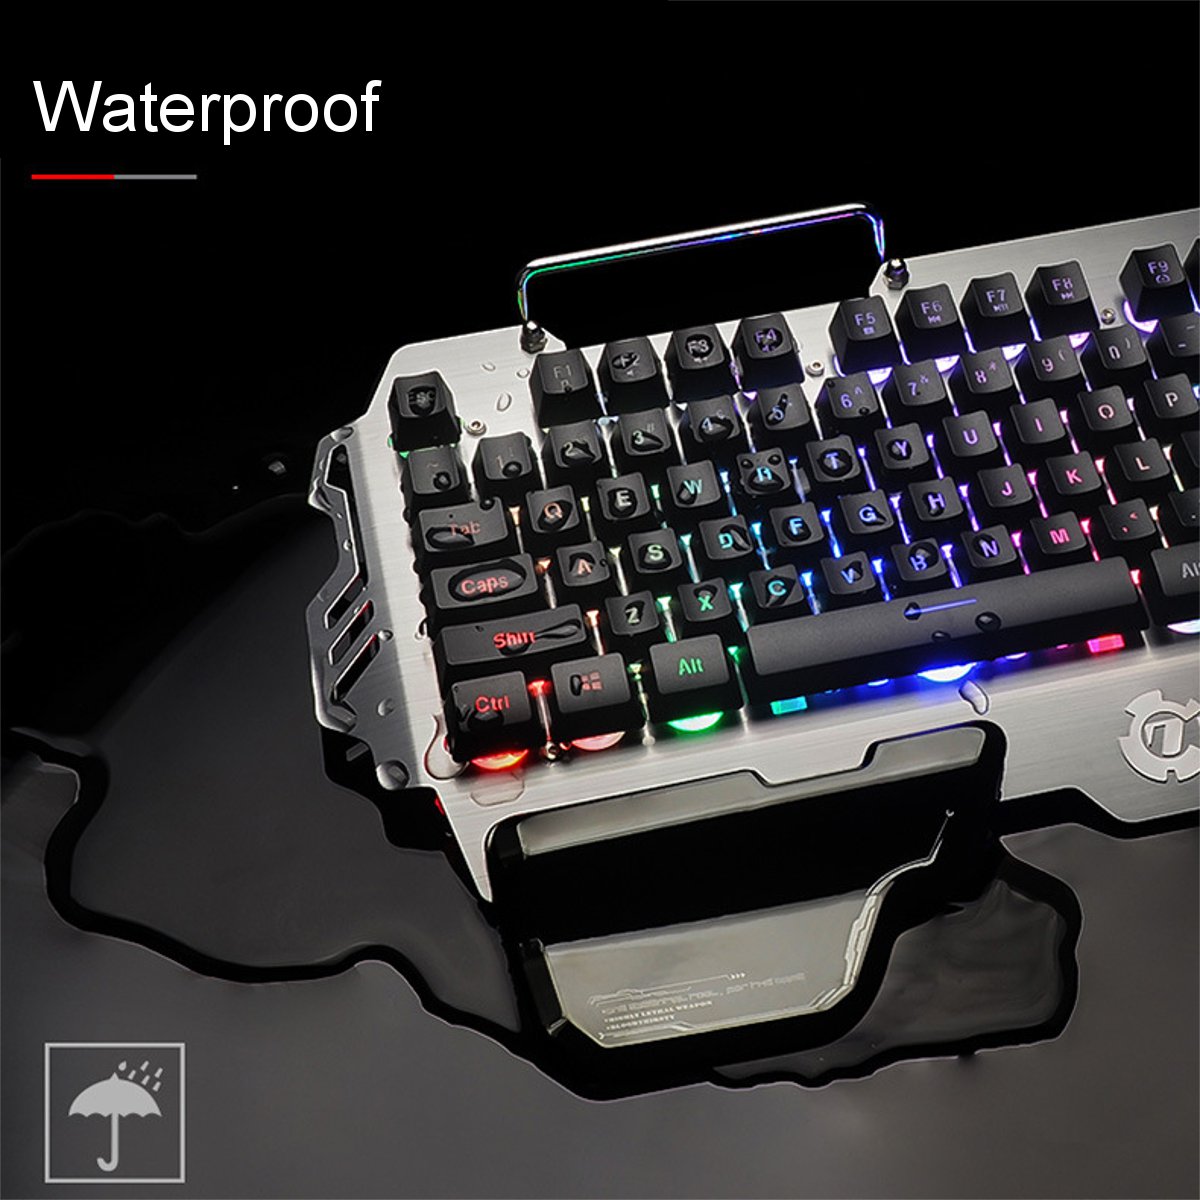 PK-900-104-Keys-Wired-Colorful-Backlight-Competitive-Games-Gaming-Keyboard-Home-Multimedia-Laptop-Co-1677603-6